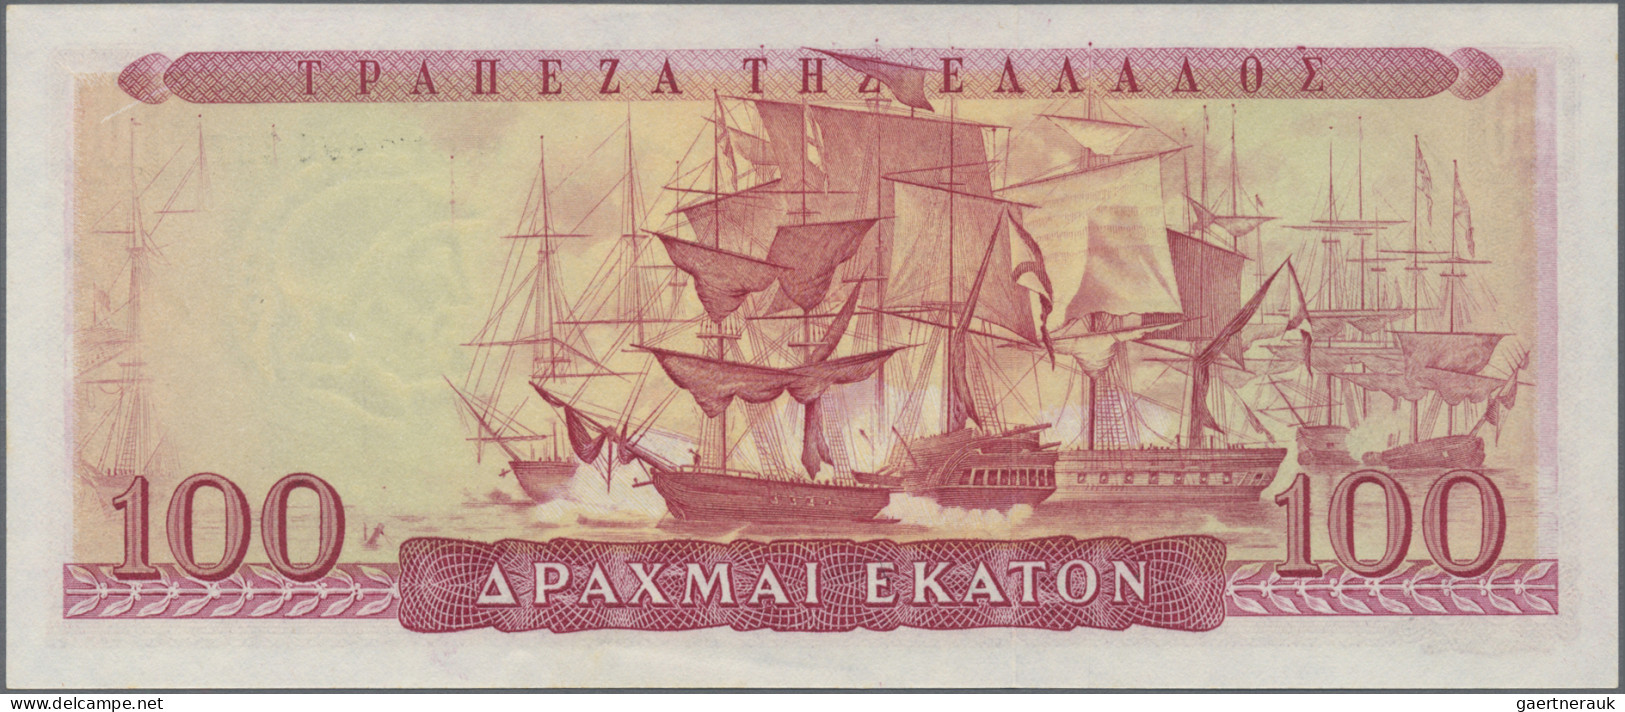 Greece: Bank of Greece, lot with 4 banknotes 1954-1955 series, with 10, 20, 50 a